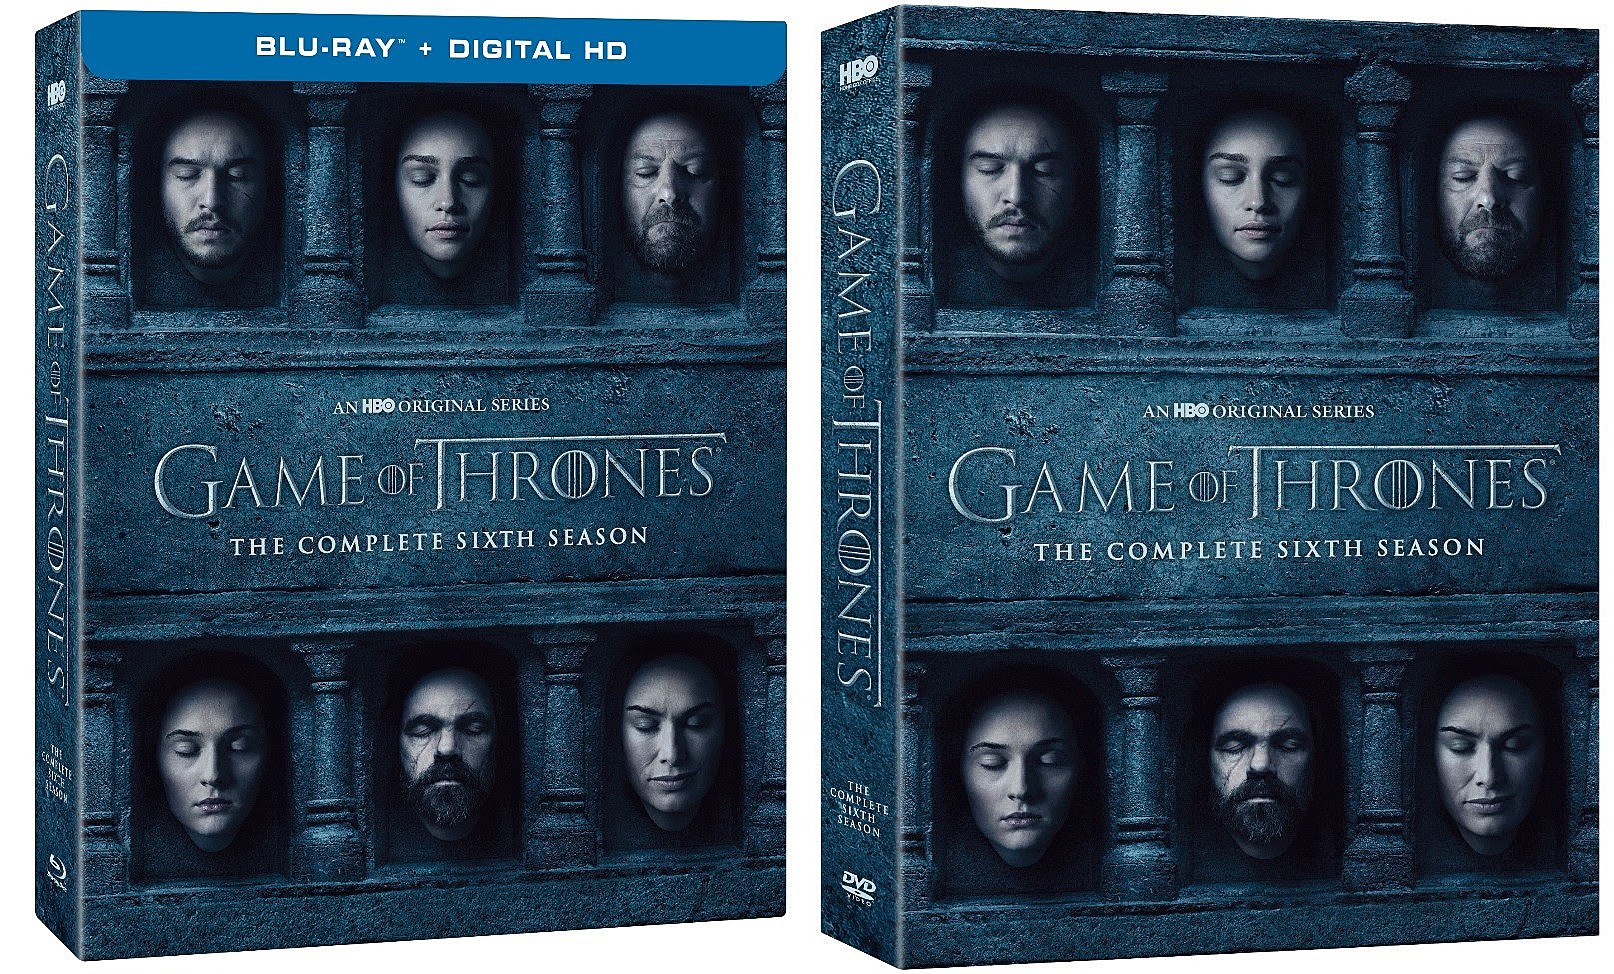 Game of Thrones: Complete Series (Bluray + Digital Copy) [Blu-ray]